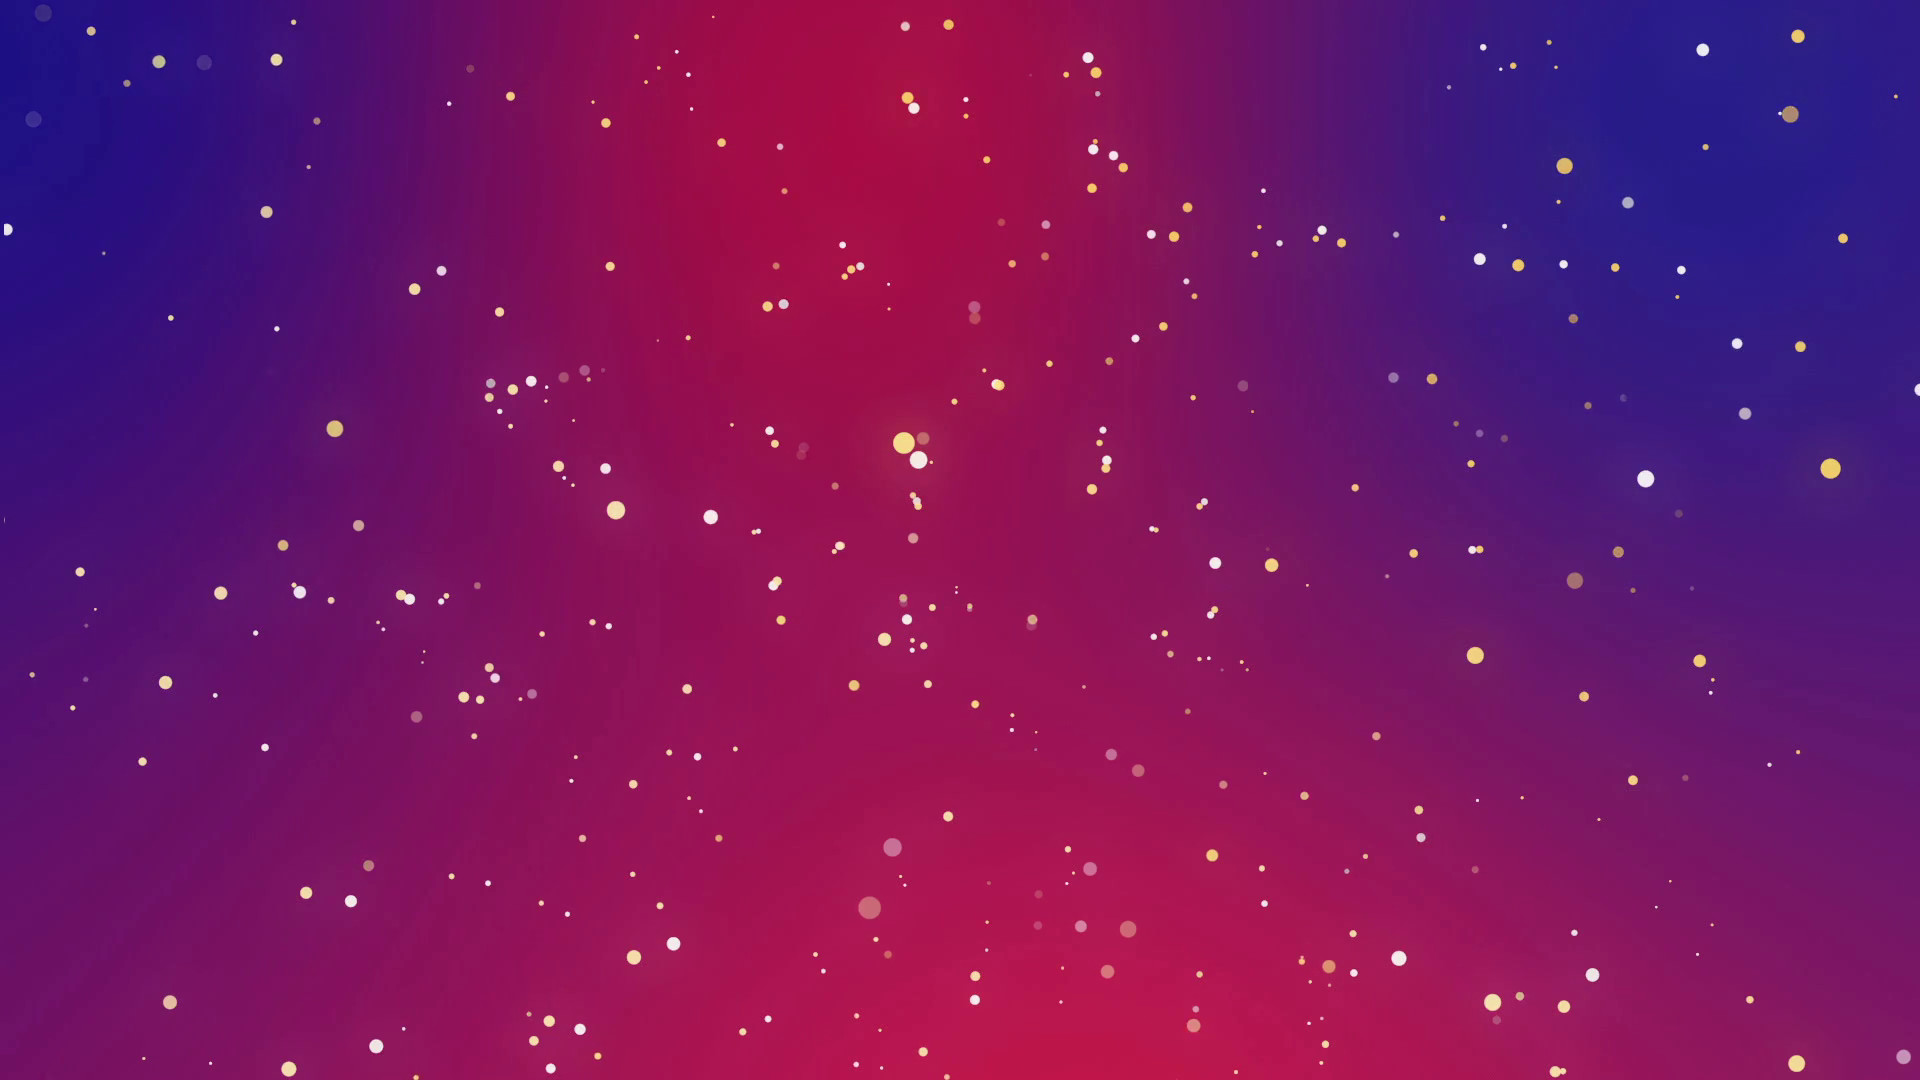 1920x1080 Festive Christmas purple blue pink gradient background with glowing yellow  white dot sparkles imitating a night sky full of stars Motion Background -  ...